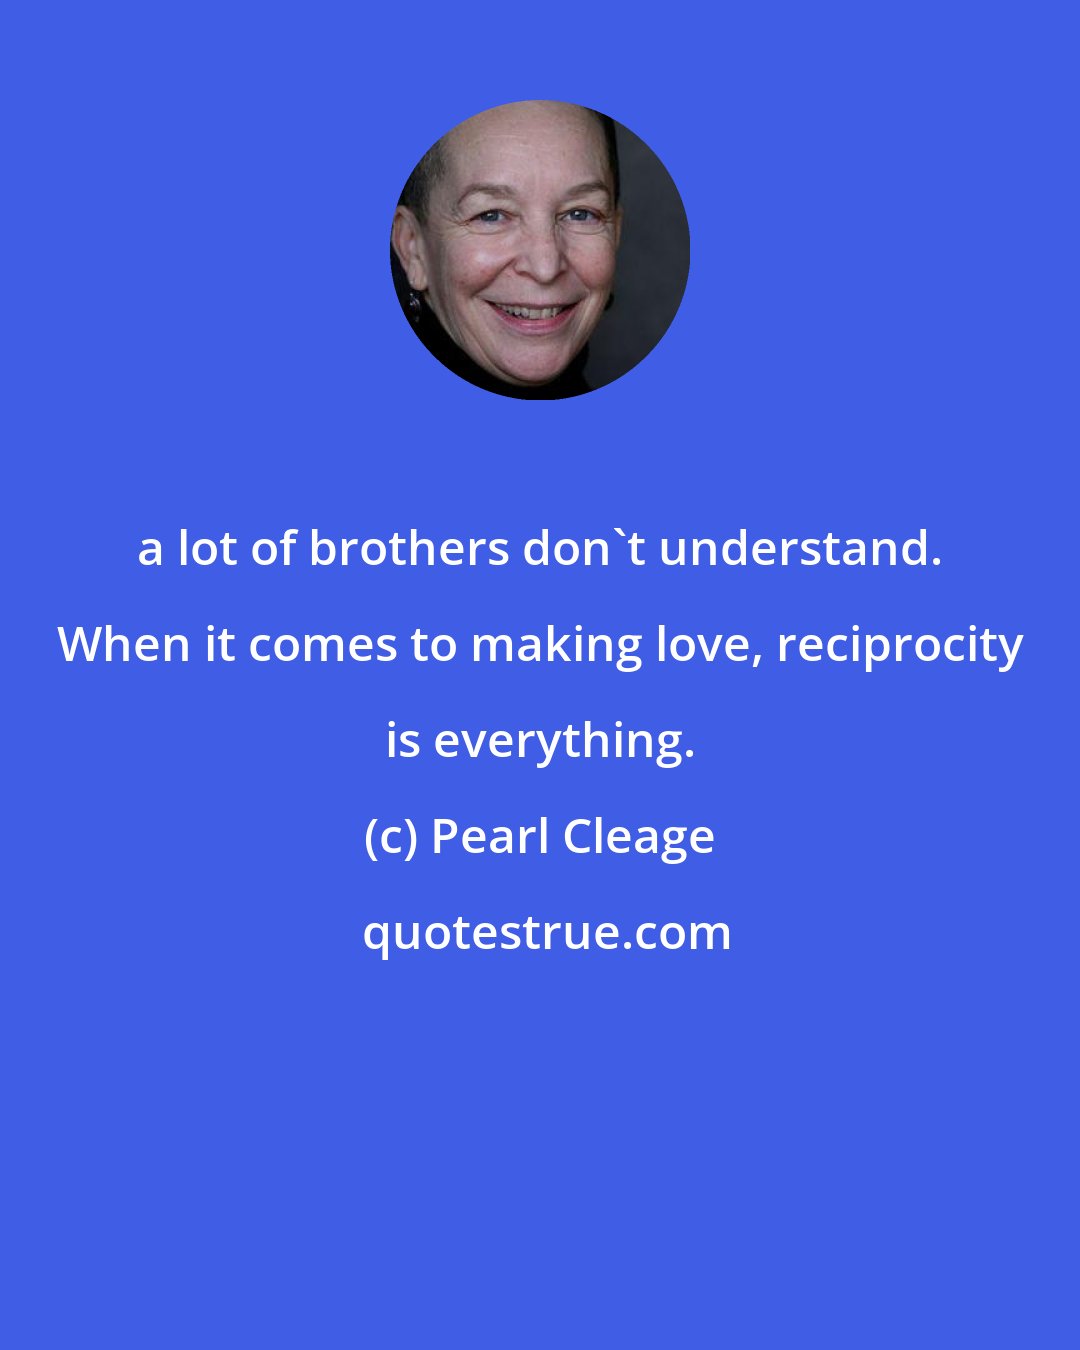 Pearl Cleage: a lot of brothers don't understand. When it comes to making love, reciprocity is everything.